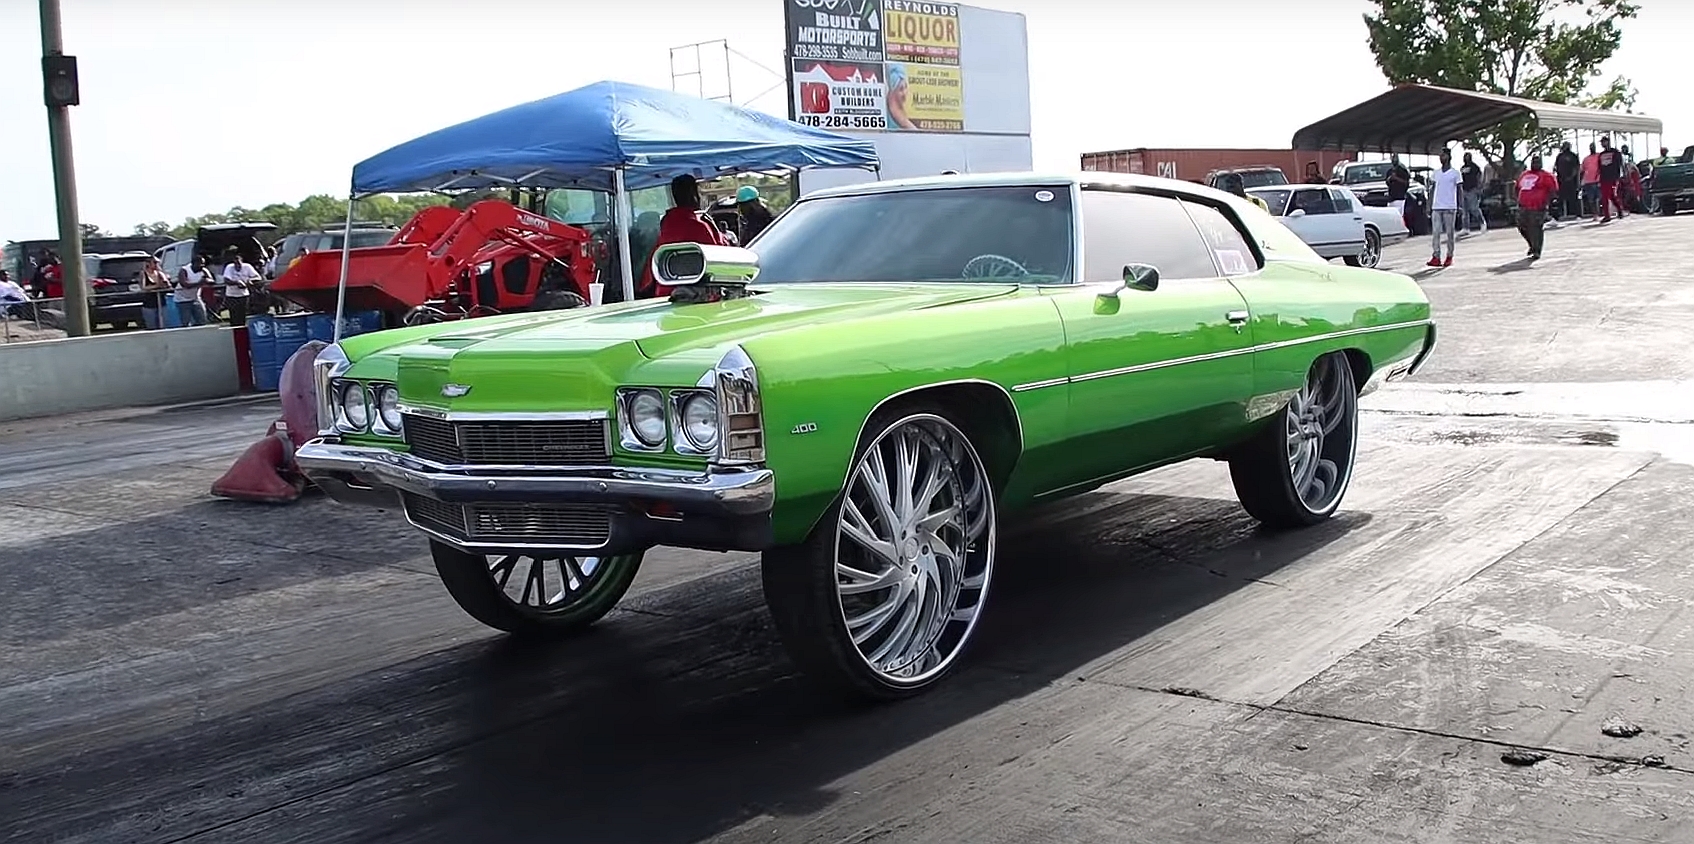 1972-chevrolet-impala-donk-hits-the-drag-strip-with-ridiculous-30-inch-wheels-159835_1.jpg